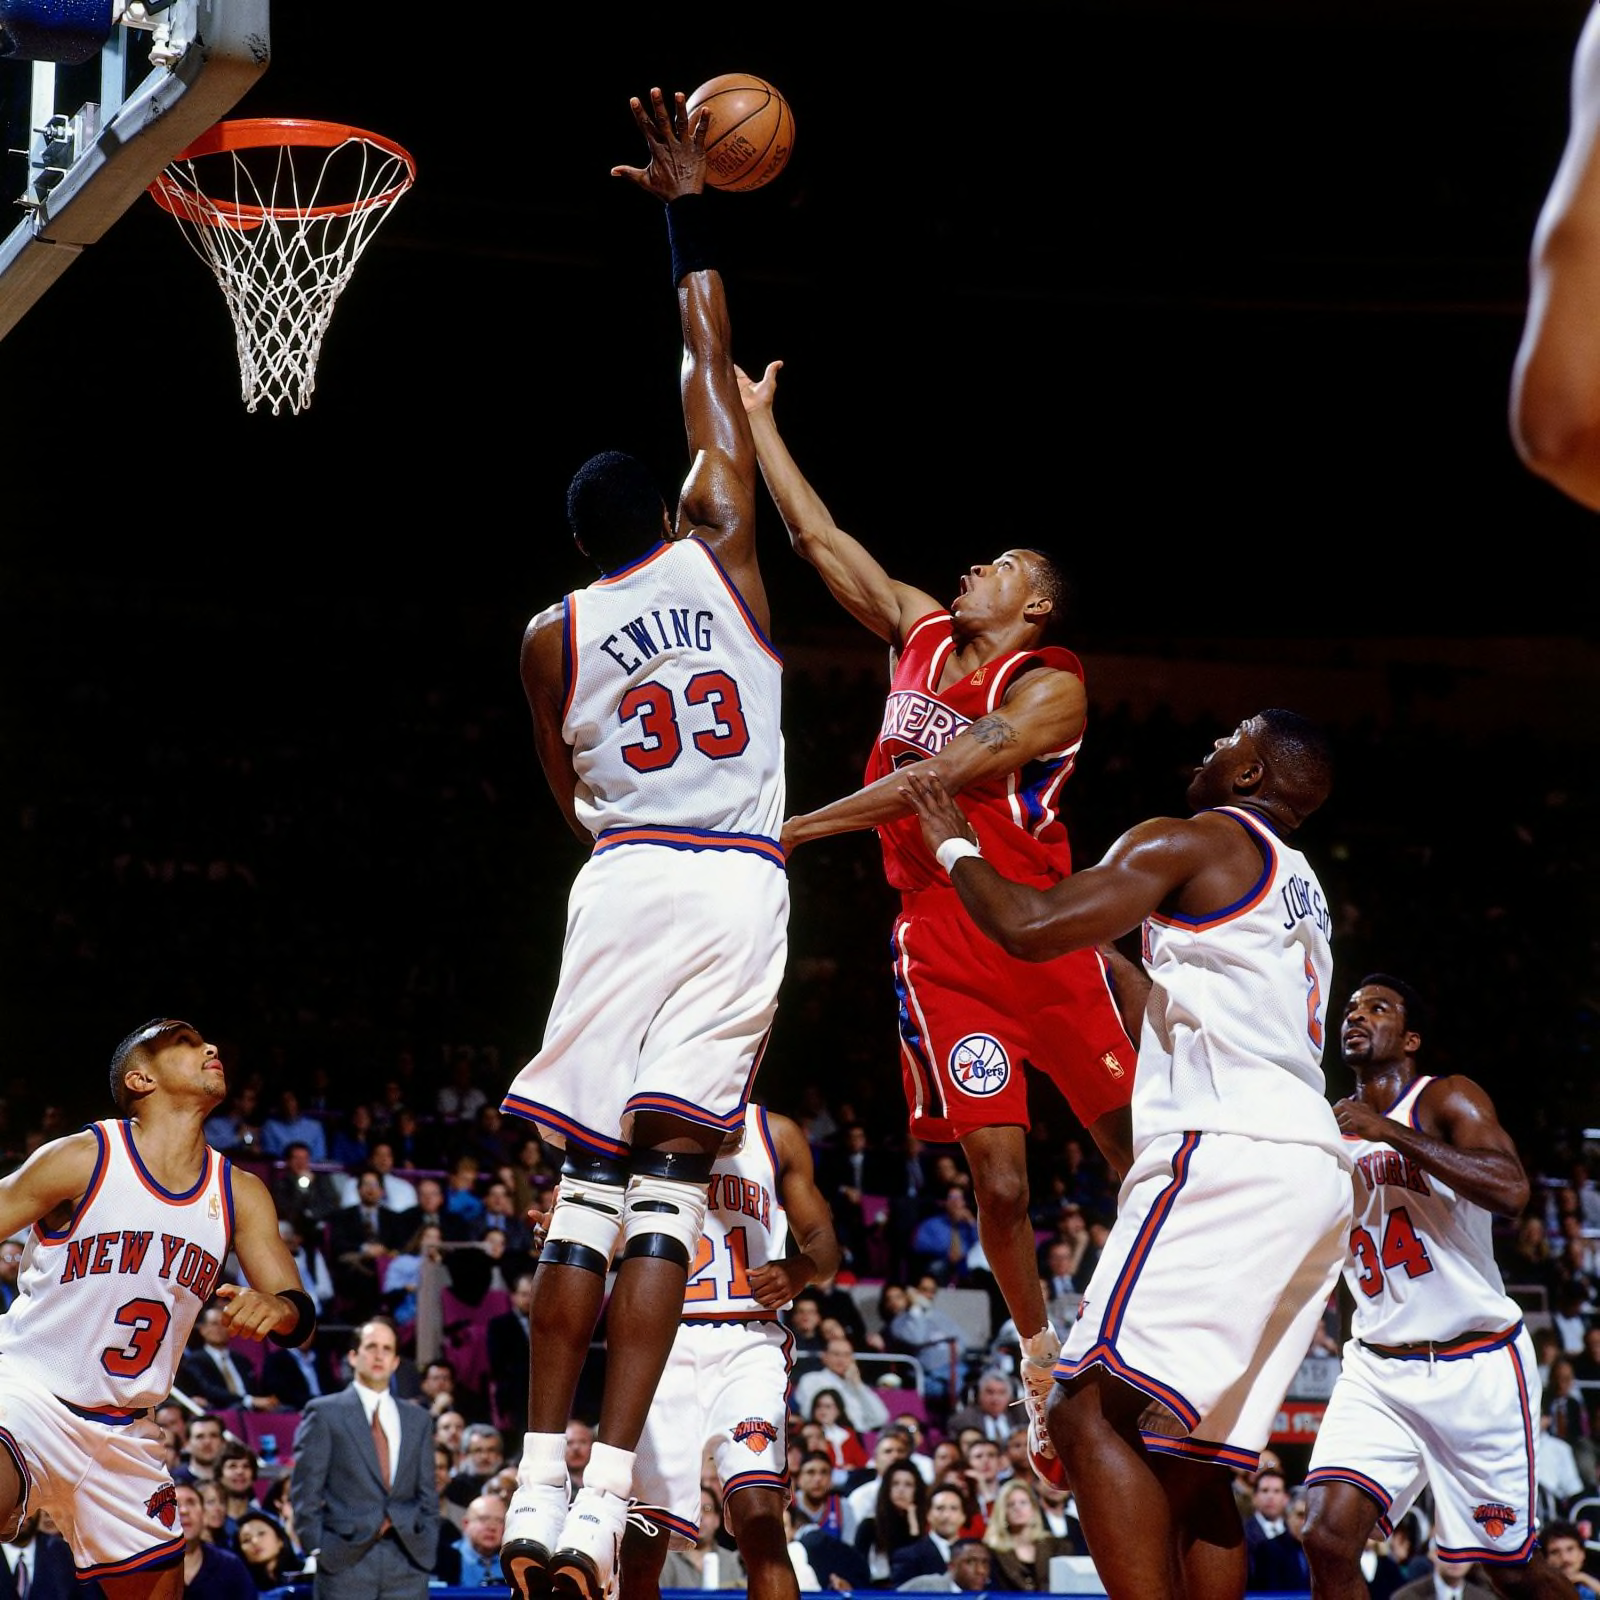 New York Knicks Patrick Ewing blocks a shot attempt by the Chicago News  Photo - Getty Images